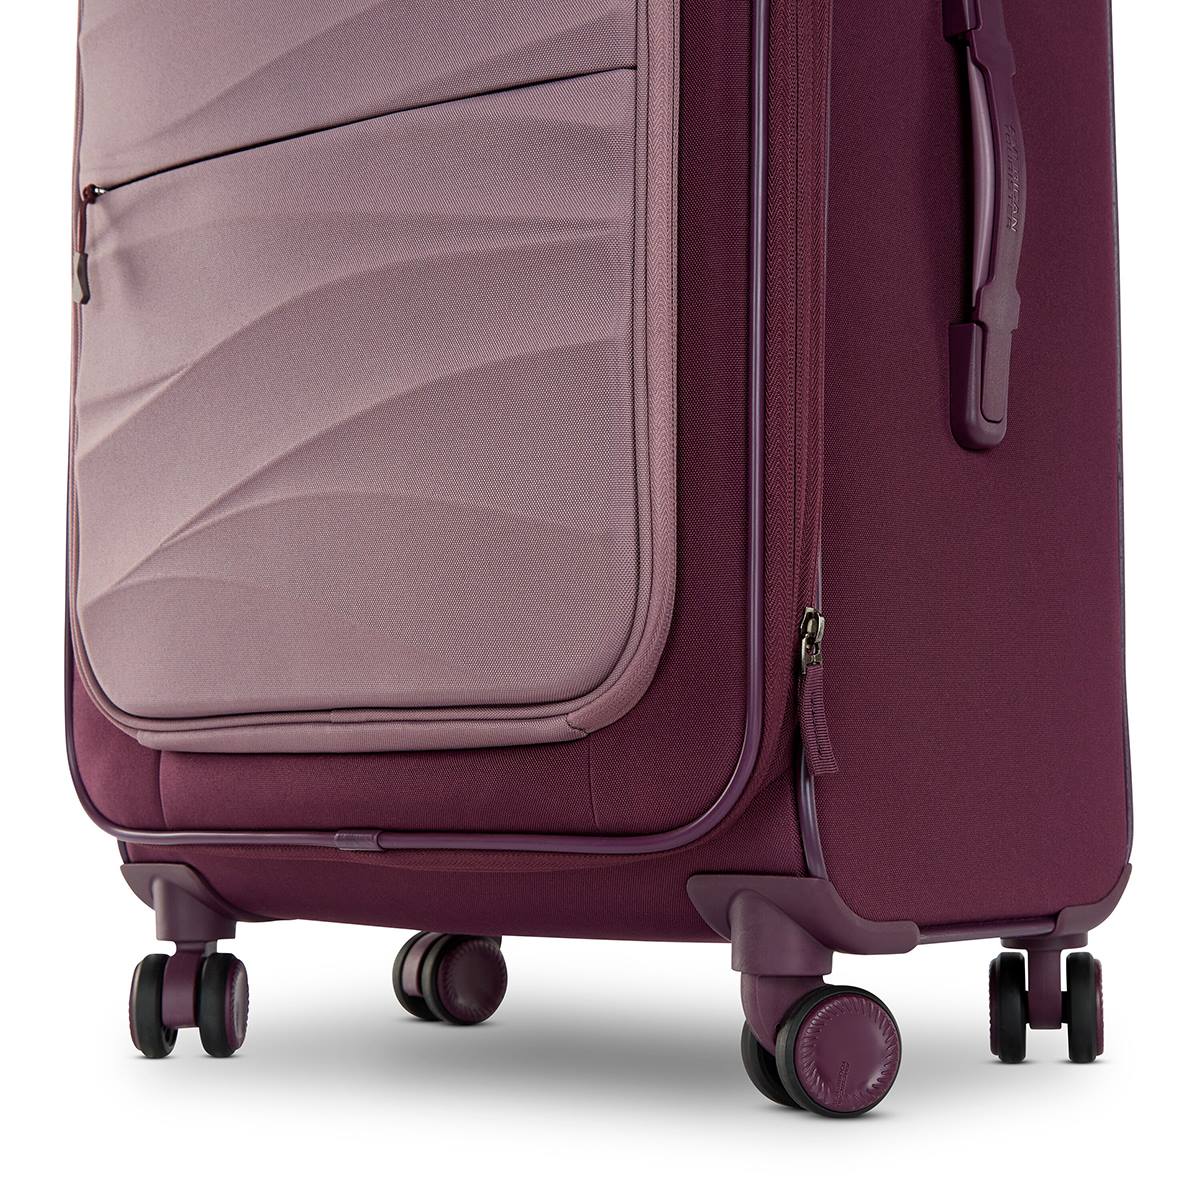 American Tourister(R) Cascade 20in. Carry-On Spinner Luggage